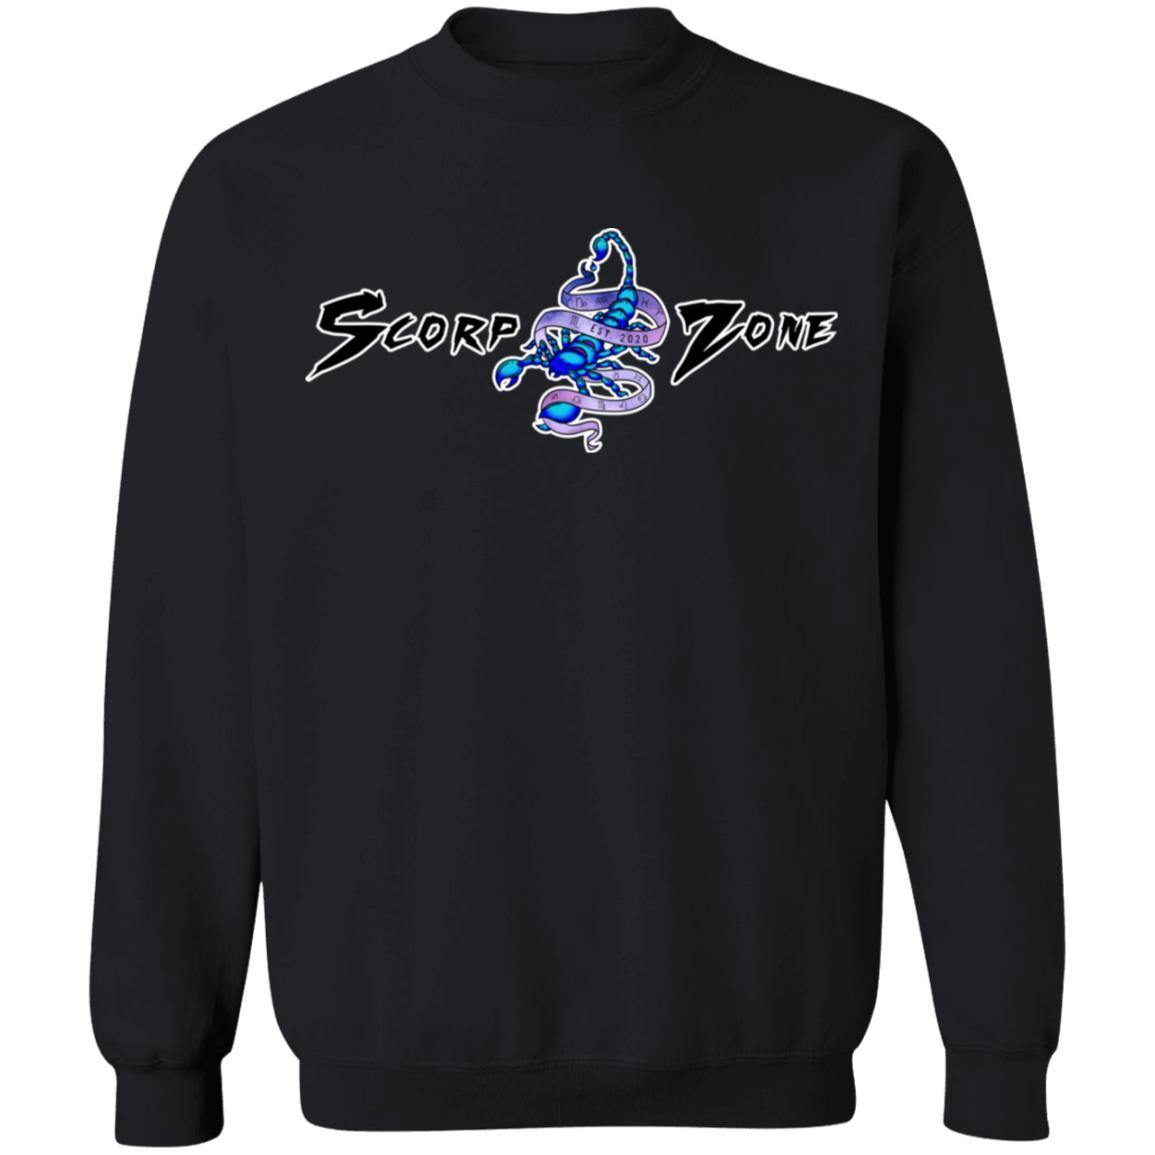 444 ANGEL NUMBER - PROTECTION - DESIGN ON BACK - SCORP ZONE LOGO ON FRONT - Z65 Crewneck Pullover Sweatshirt - ScorpZone